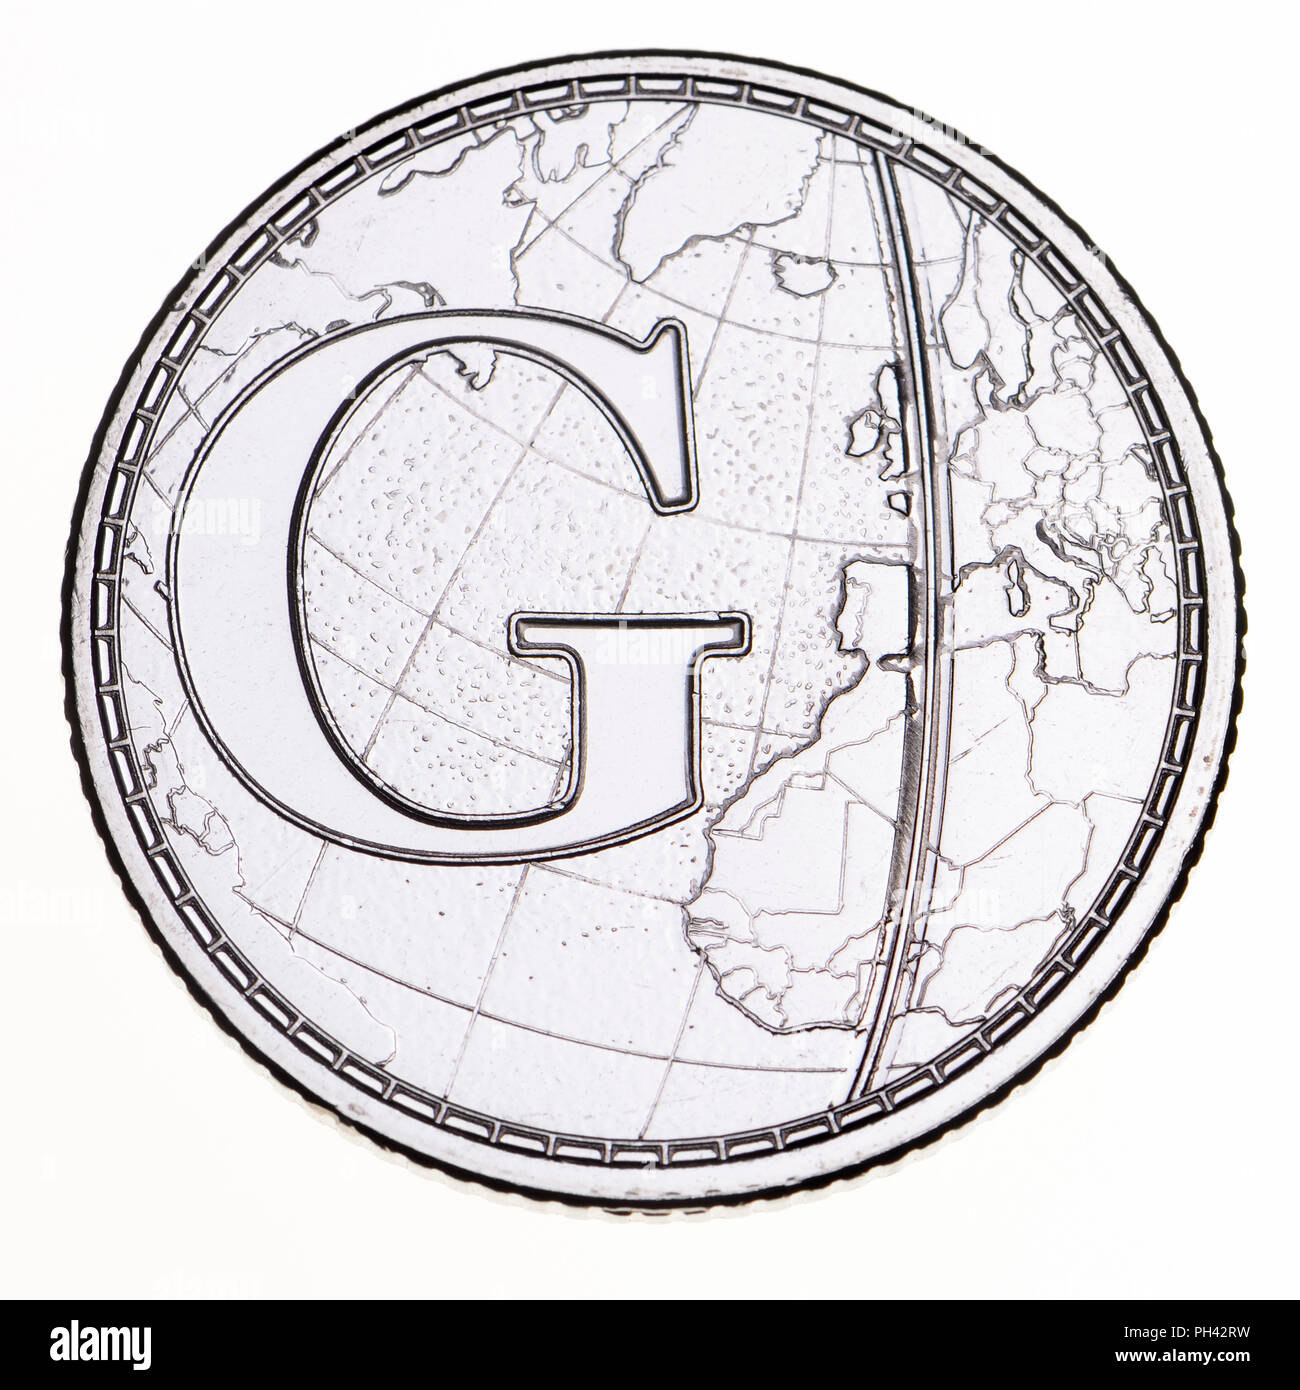 British 10p coin (reverse) from 2018 'Alphabet' series, celebrating Britishness. G - Greenwich Mean Time Stock Photo